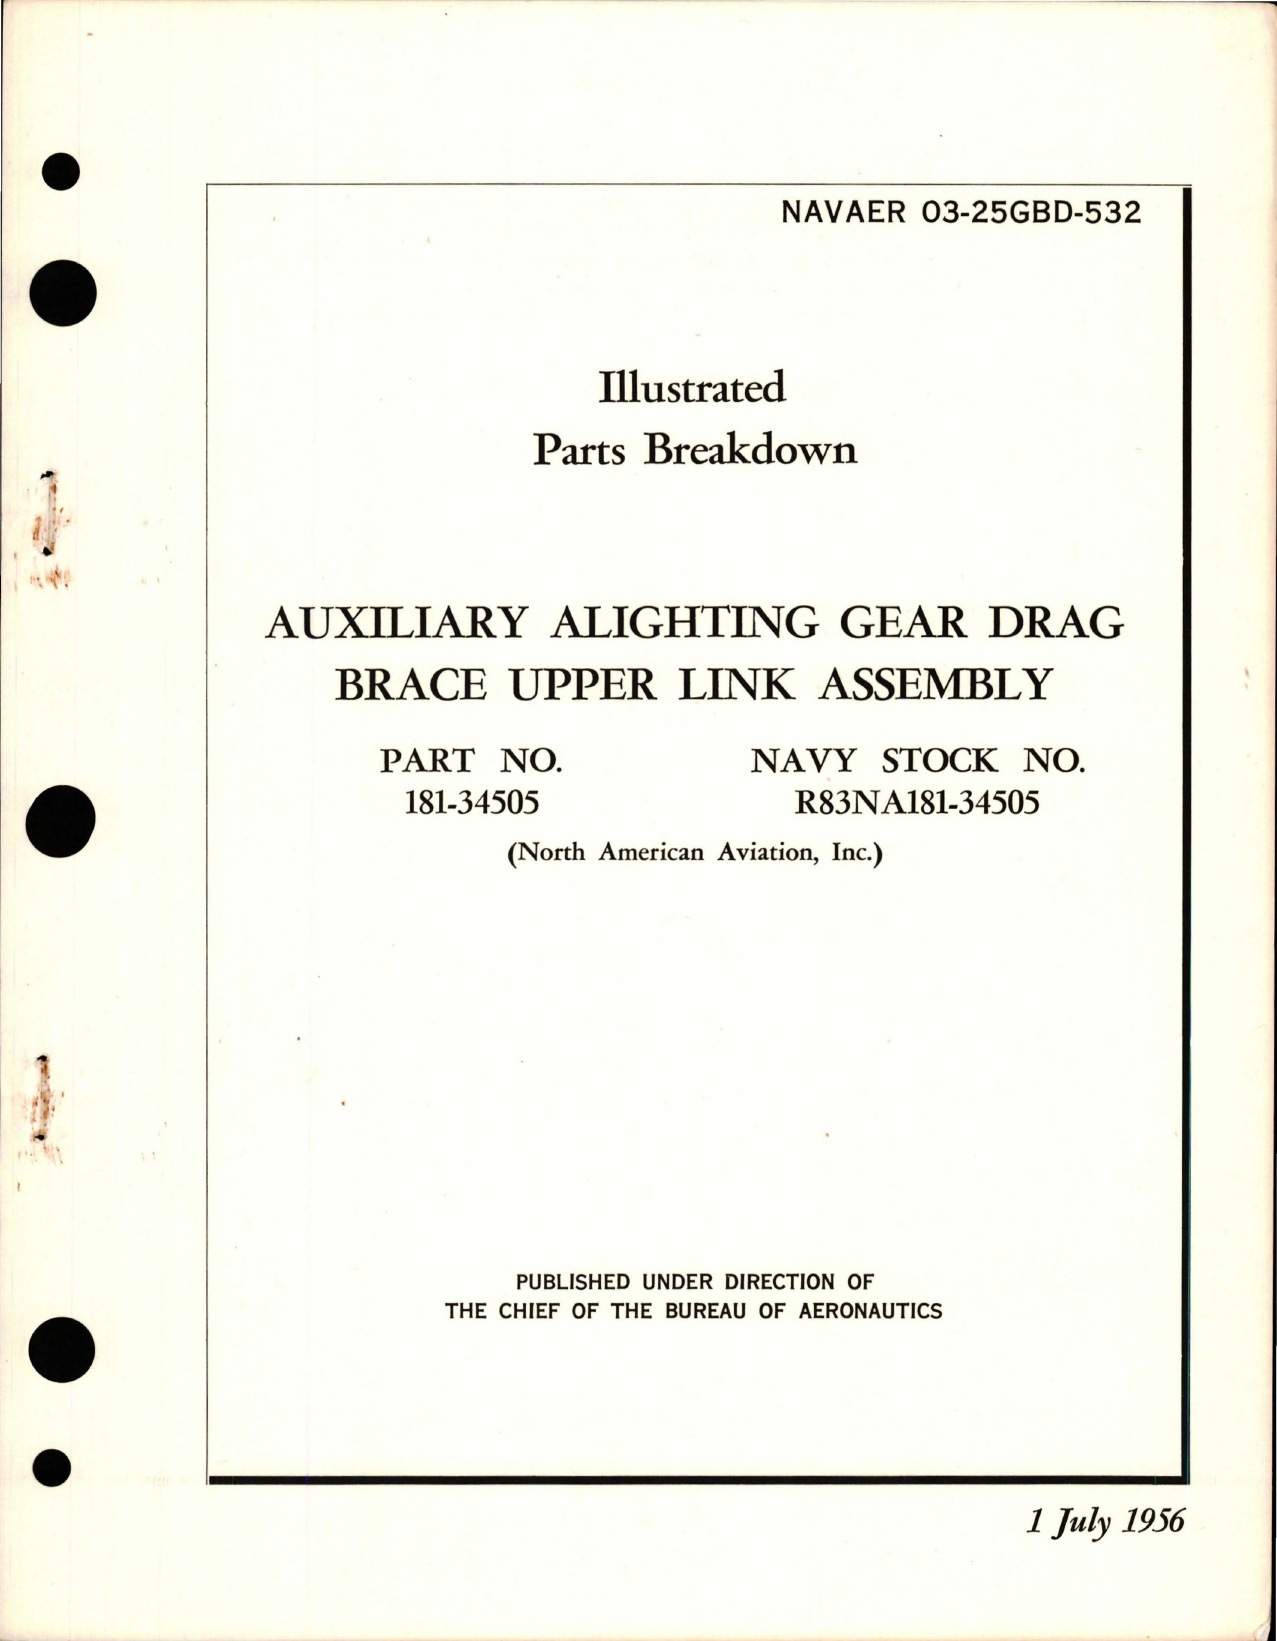 Sample page 1 from AirCorps Library document: Illustrated Parts Breakdown for Auxiliary Alighting Gear Drag Brace Upper Link Assembly - Part 181-34505 